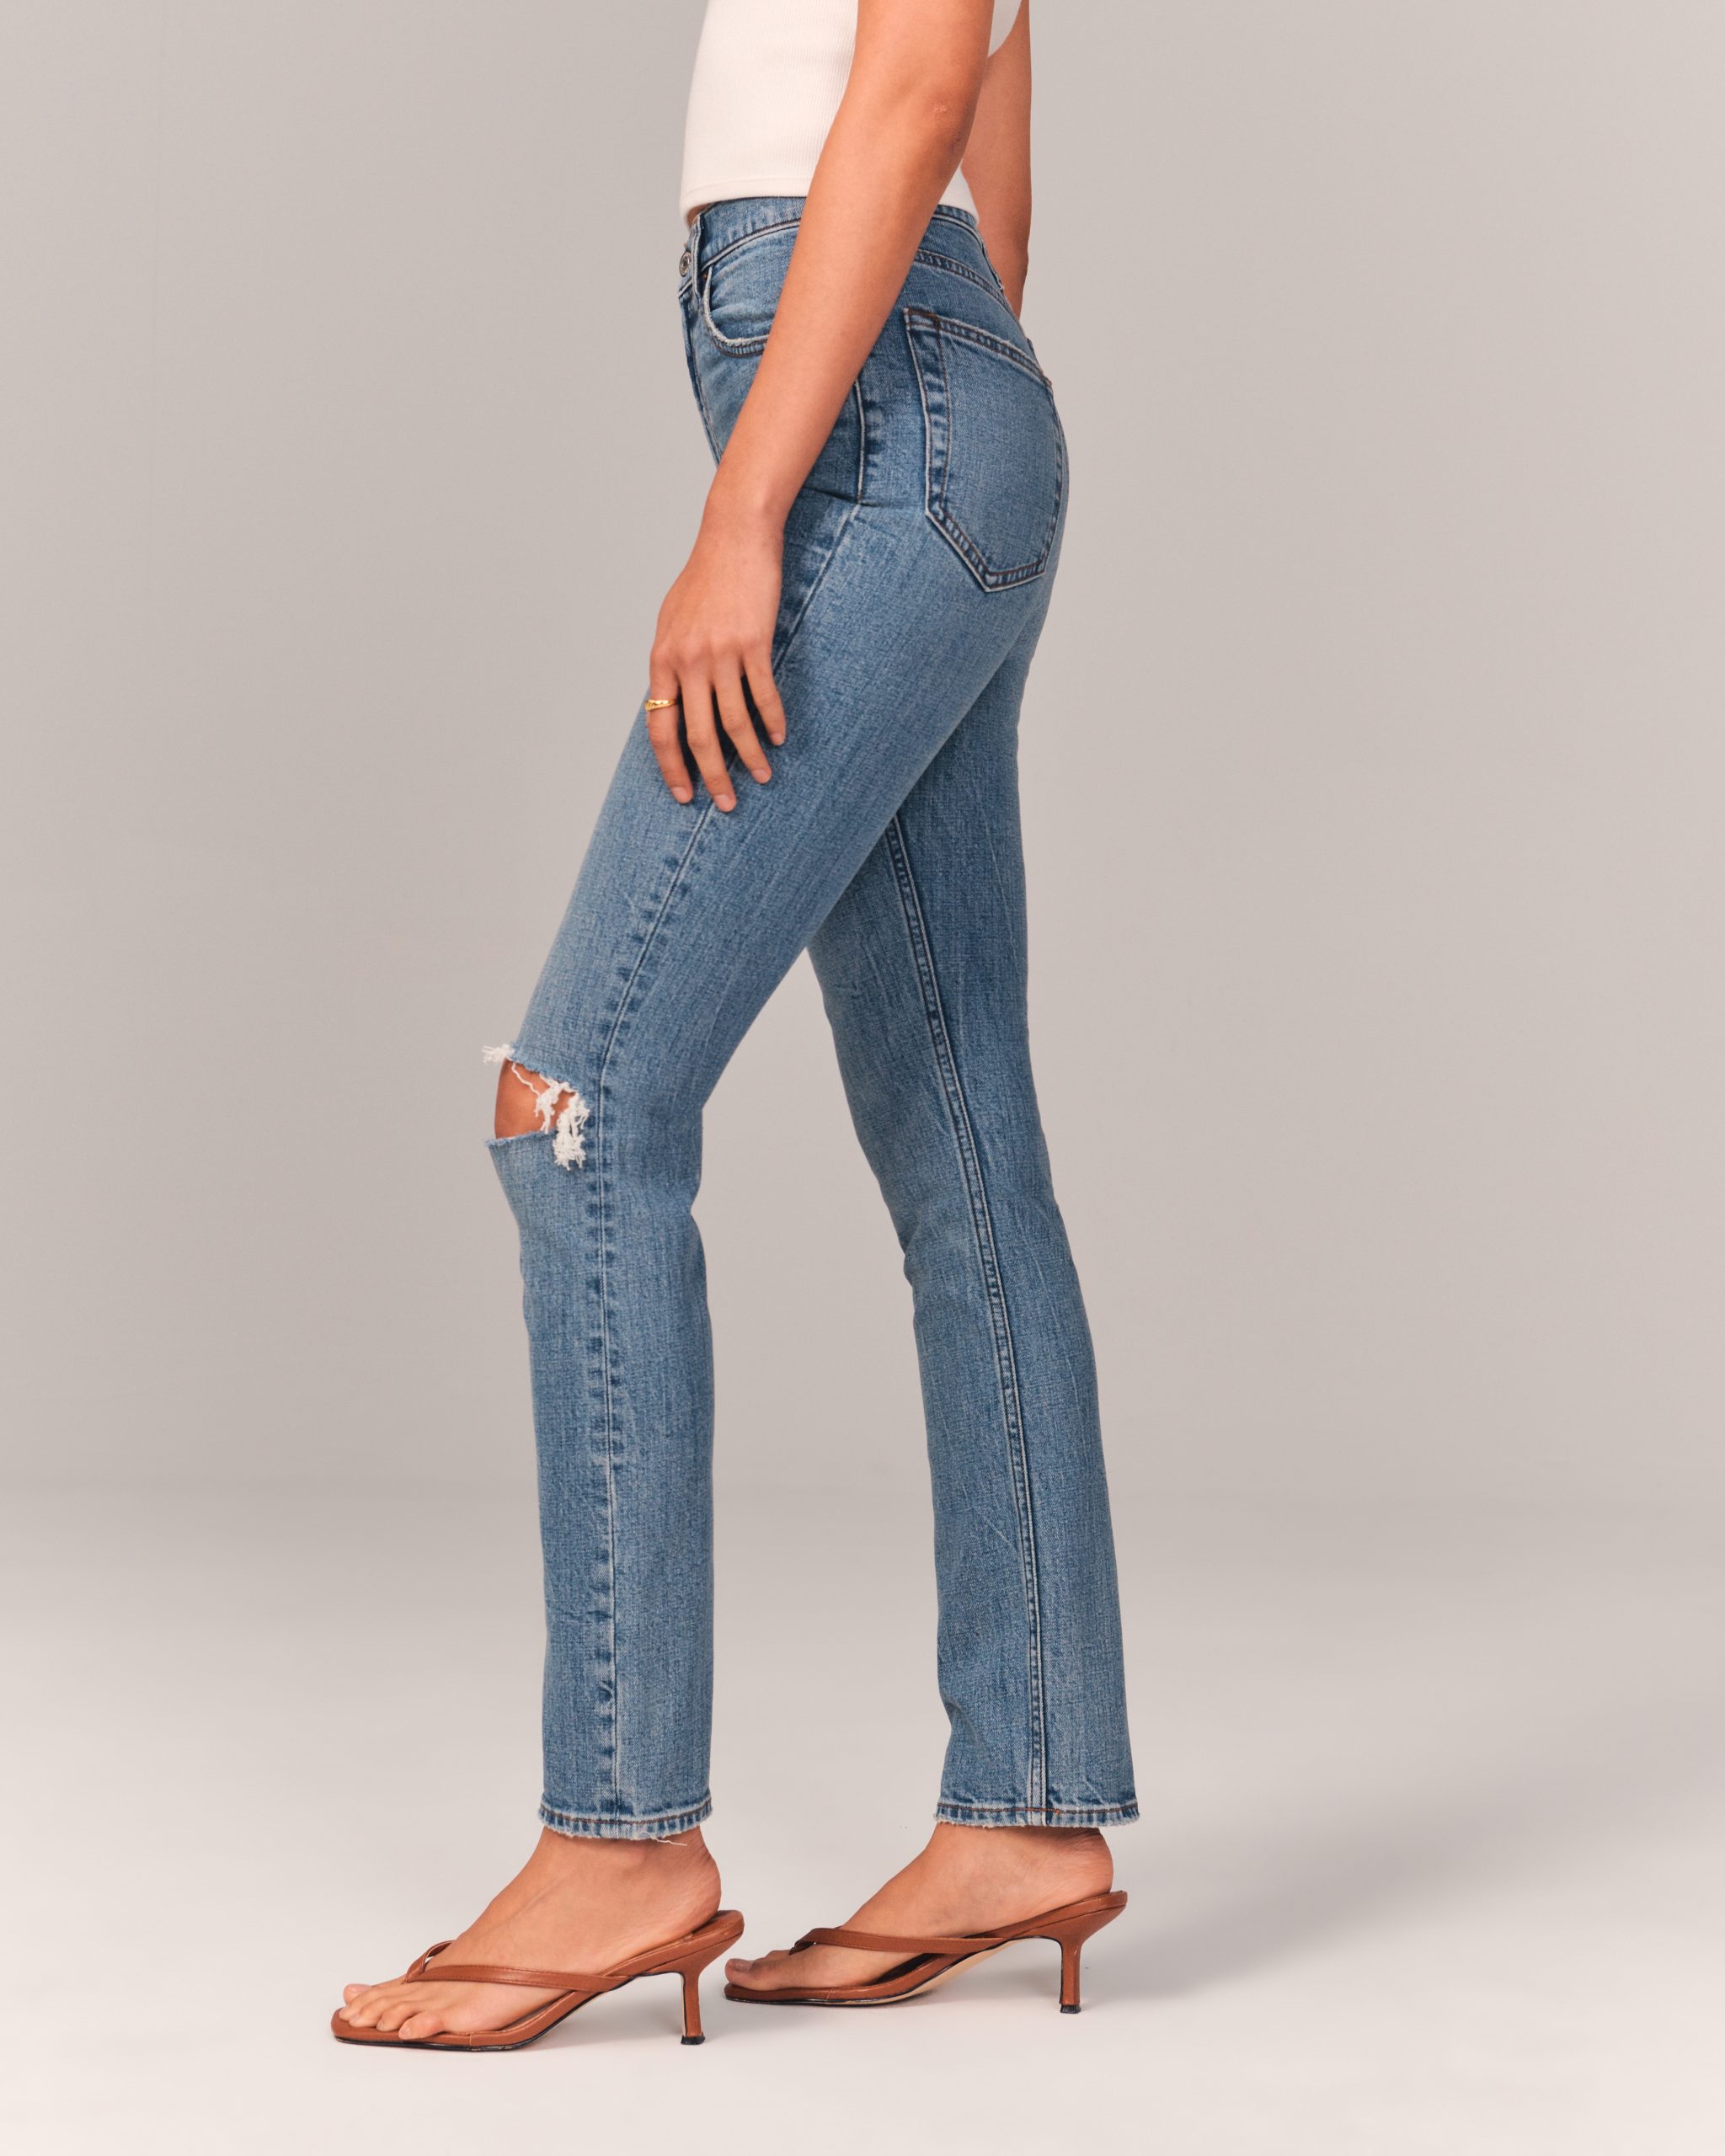 Slim fit jeans women: Discover the Elegance of it插图4